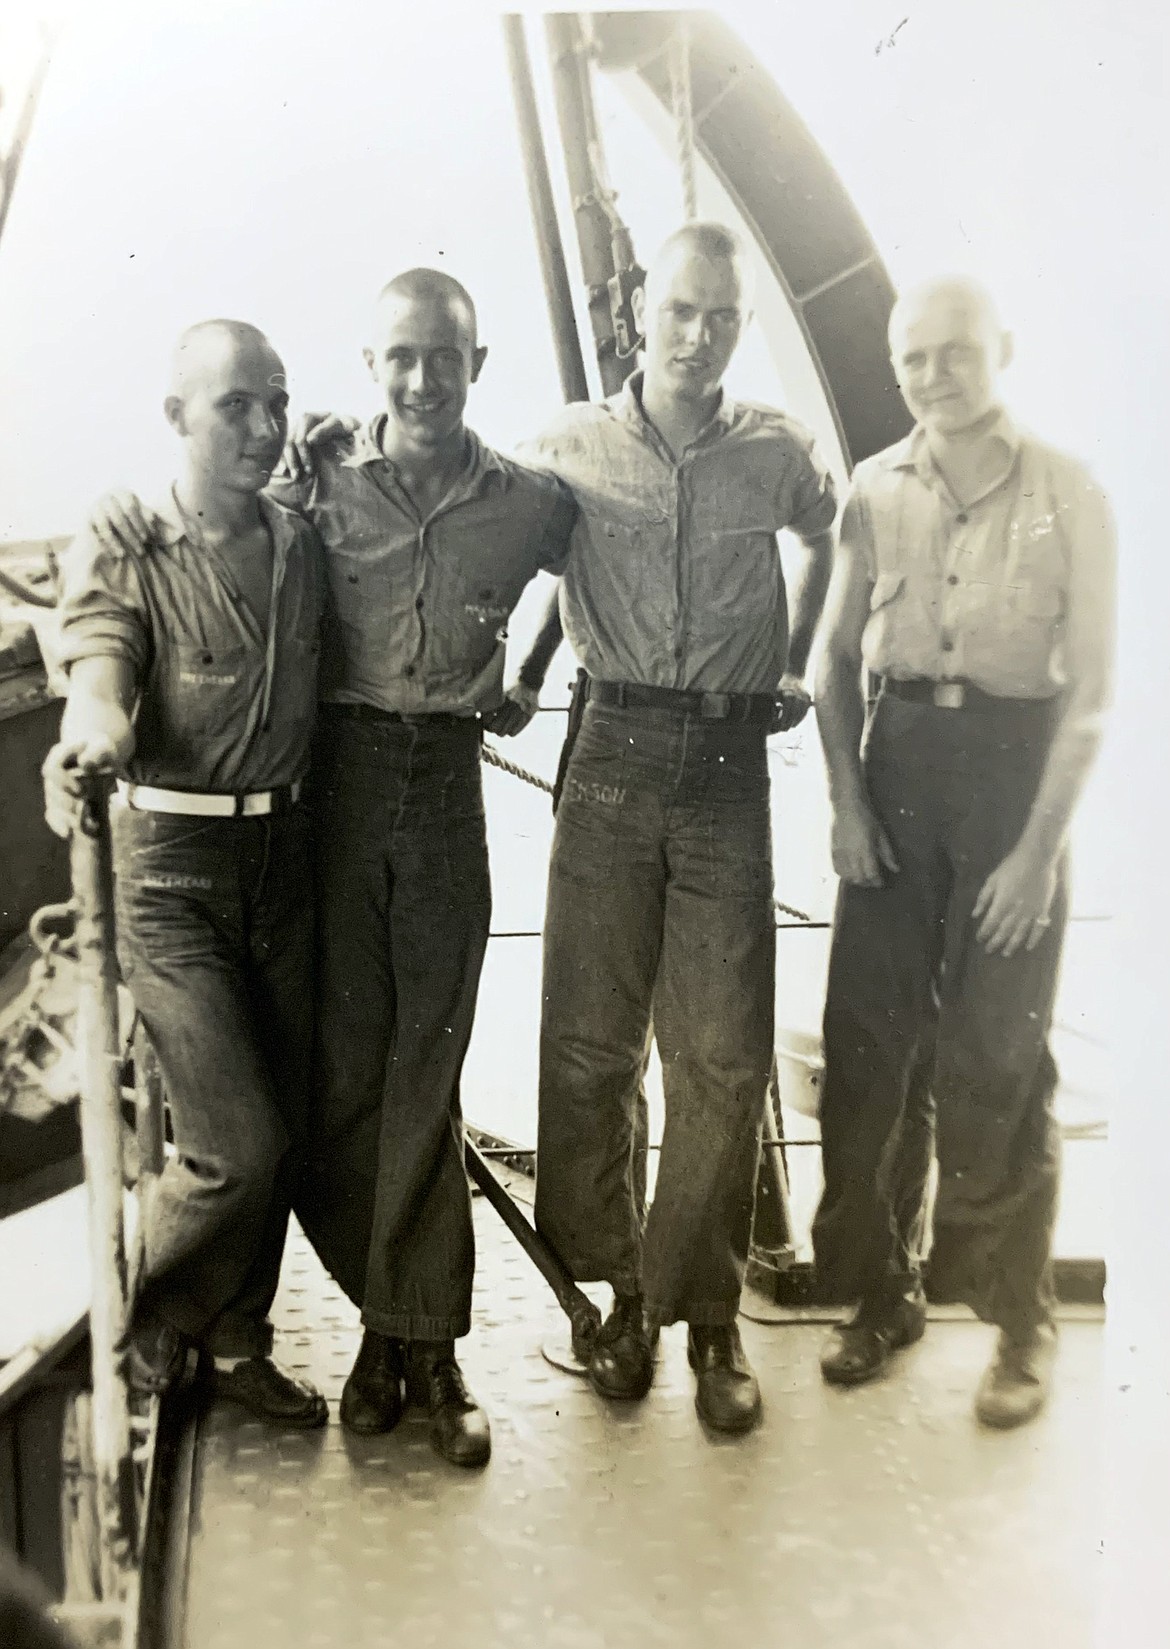 Arnold Peterson (third from left) and his shipmates grab a quick photo as they cross the equator southwest of Hawaii in 1944. (photo provided)